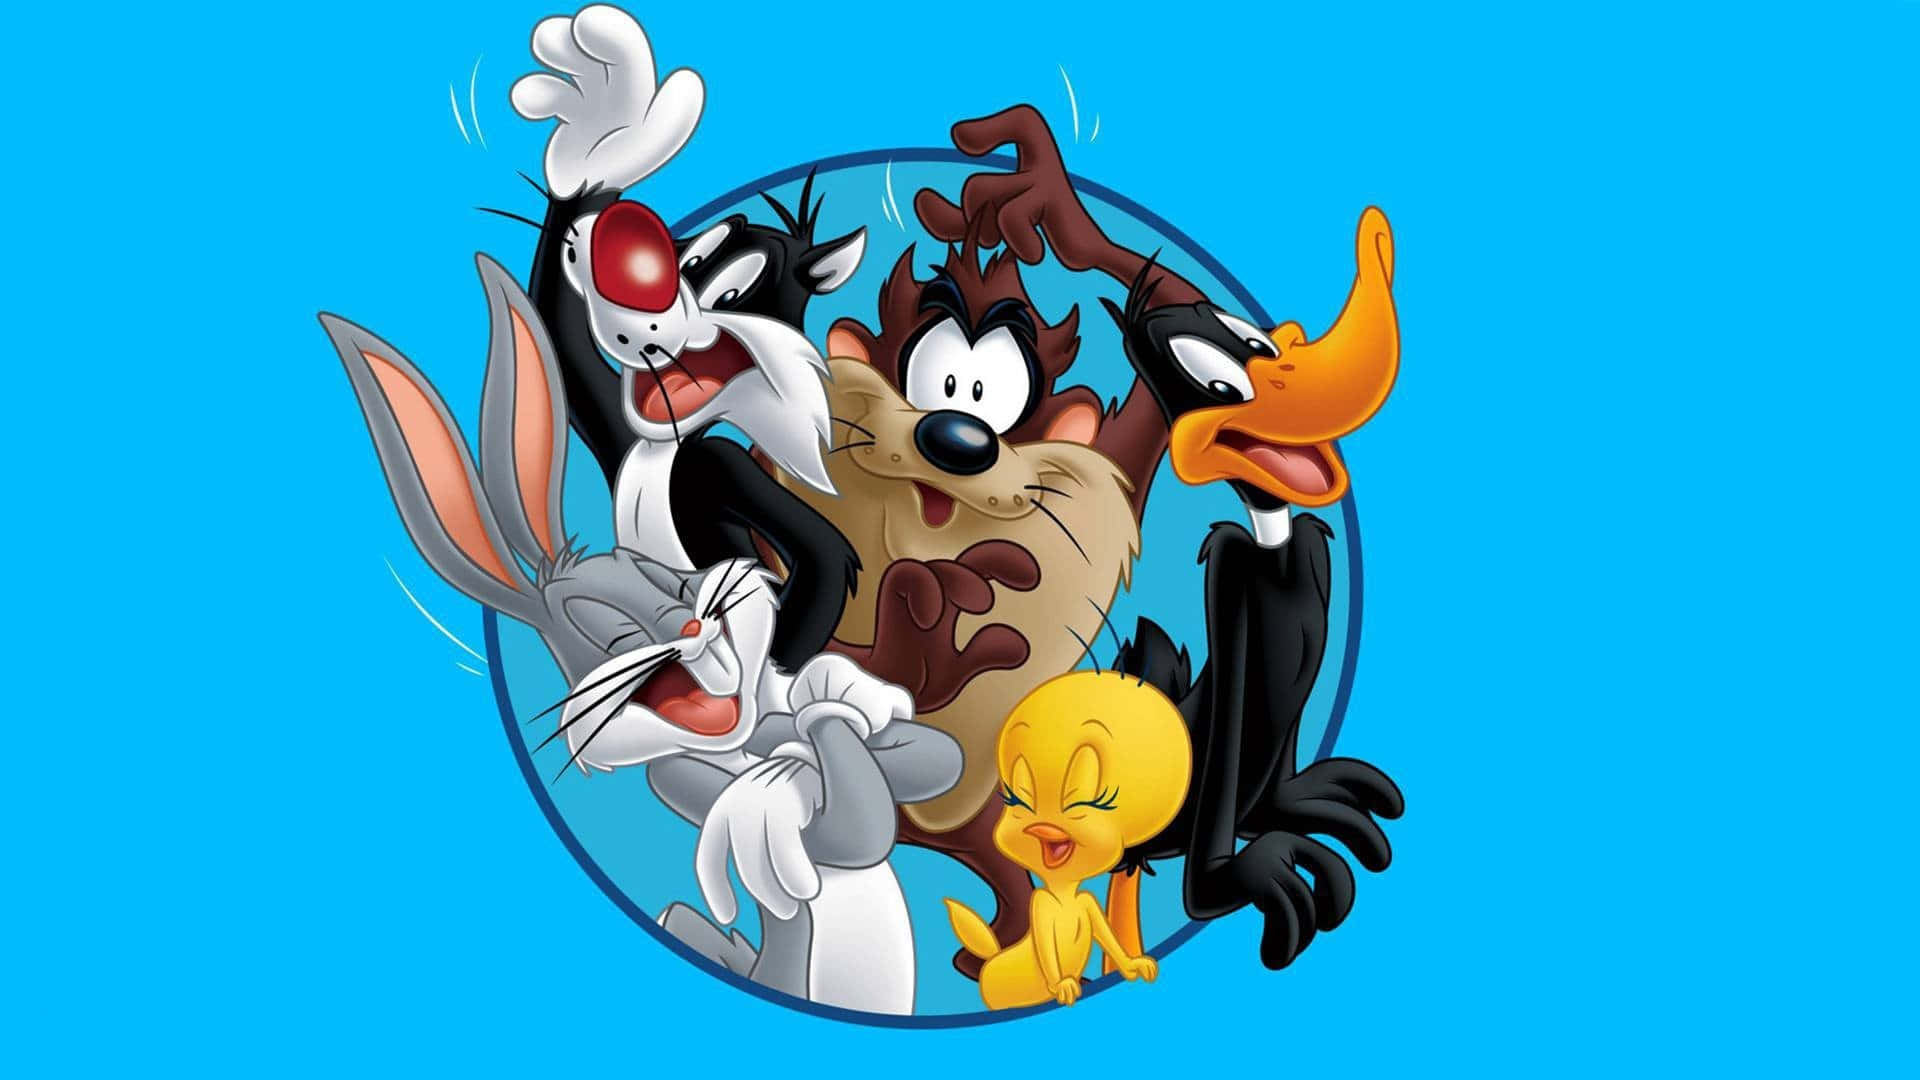 Enjoying the day with your favorite cartoon characters Wallpaper